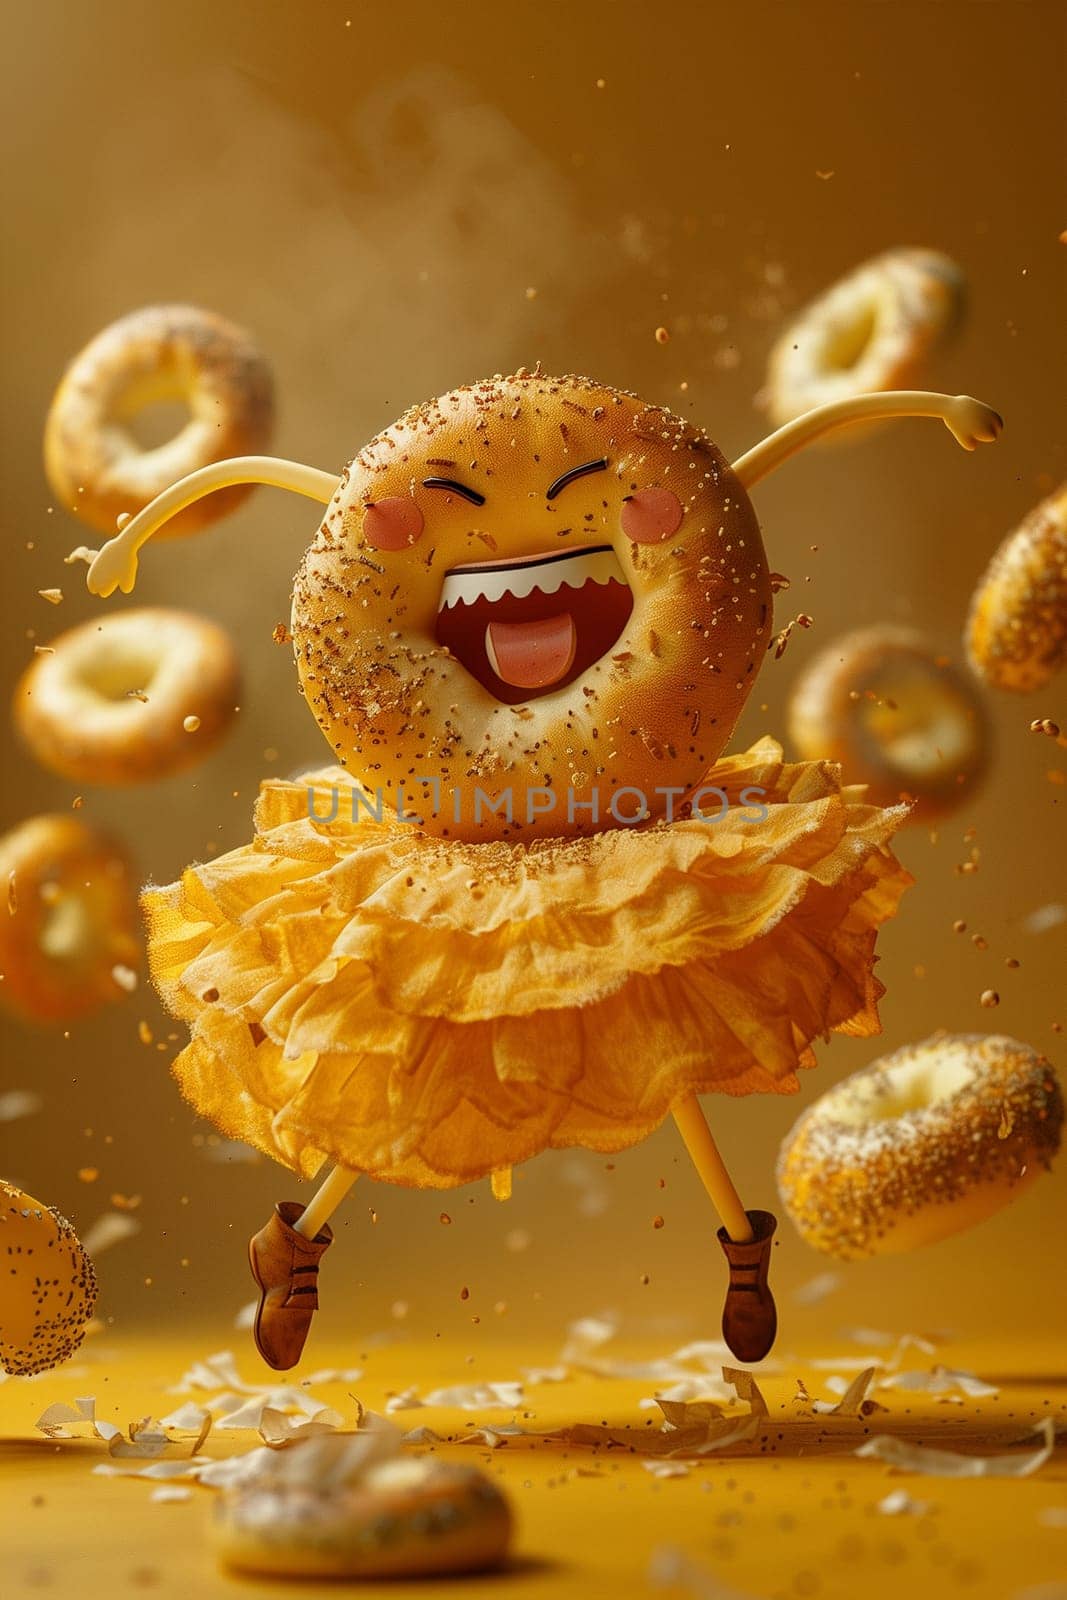 Animated Joyful Donut Character Dancing Amid Falling Sprinkles and Pastries by Sd28DimoN_1976